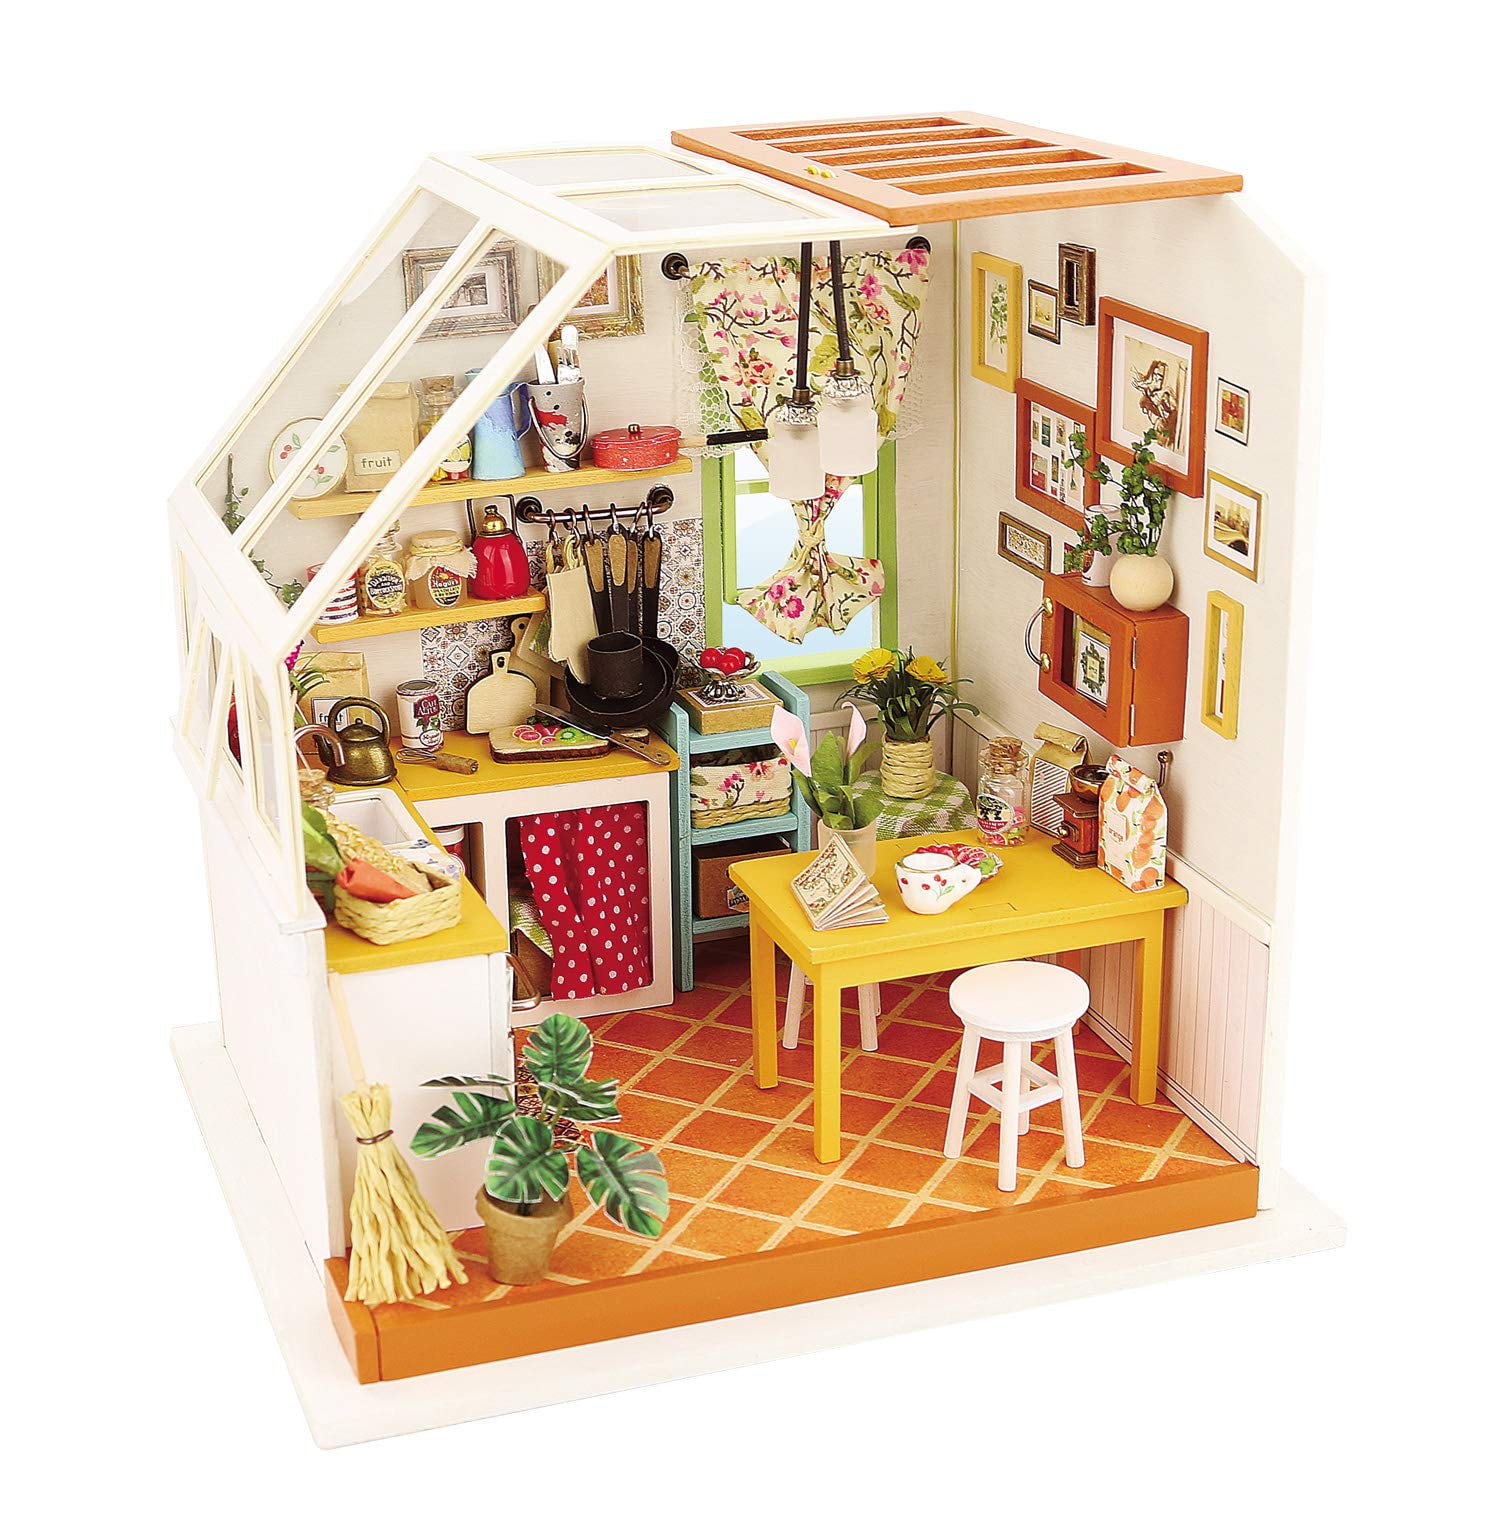 DIY Miniature House Kit: Borrowed Garden - Geppetto's Toys - Hands